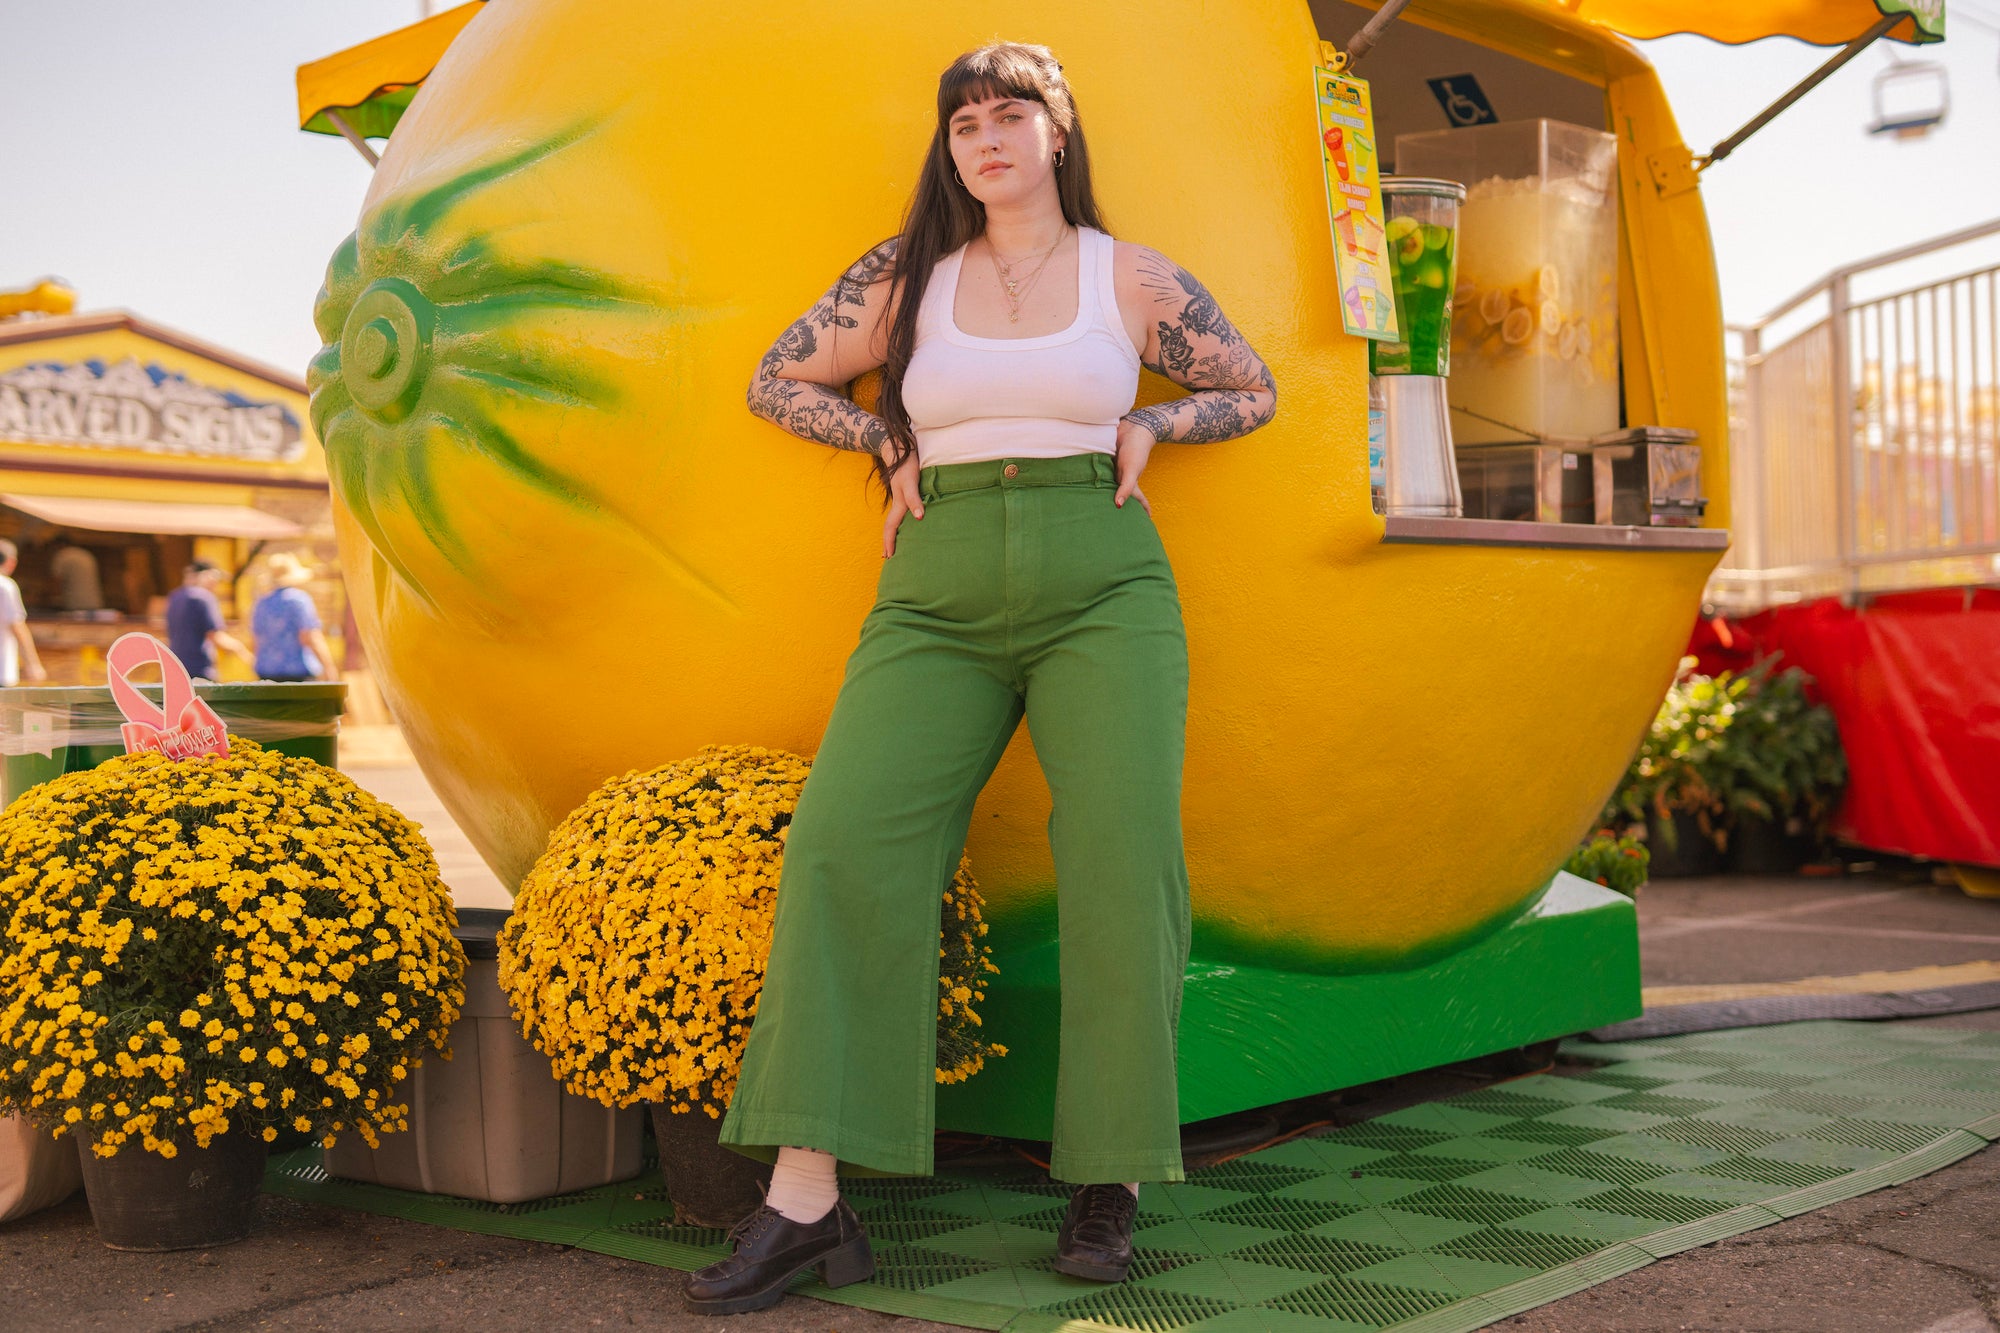 Sydney is wearing Cropped Tank Top in Vintage Off-White and Bell Bottoms in Lawn Green